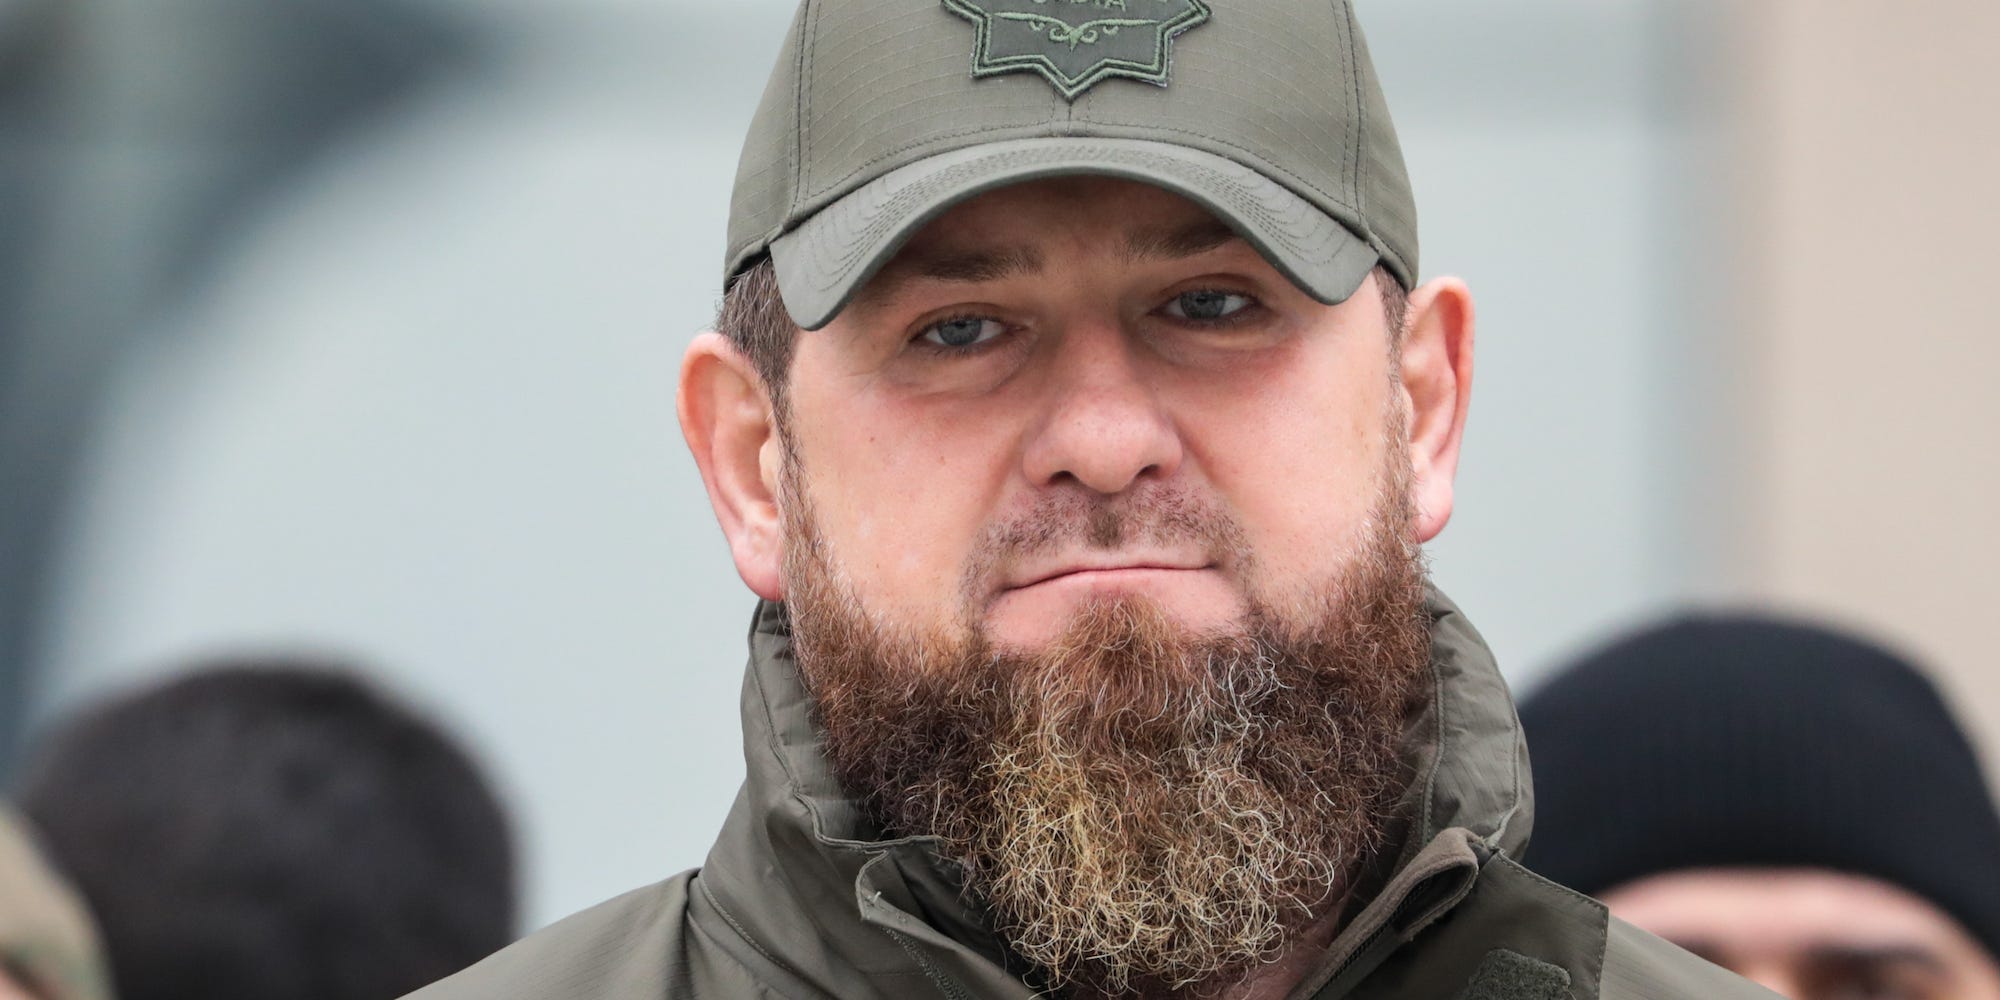 A head and shoulders shot of Ramzan Kadyrov, leader of the Chechen Republic, in a baseball cap on February 25, 2022.